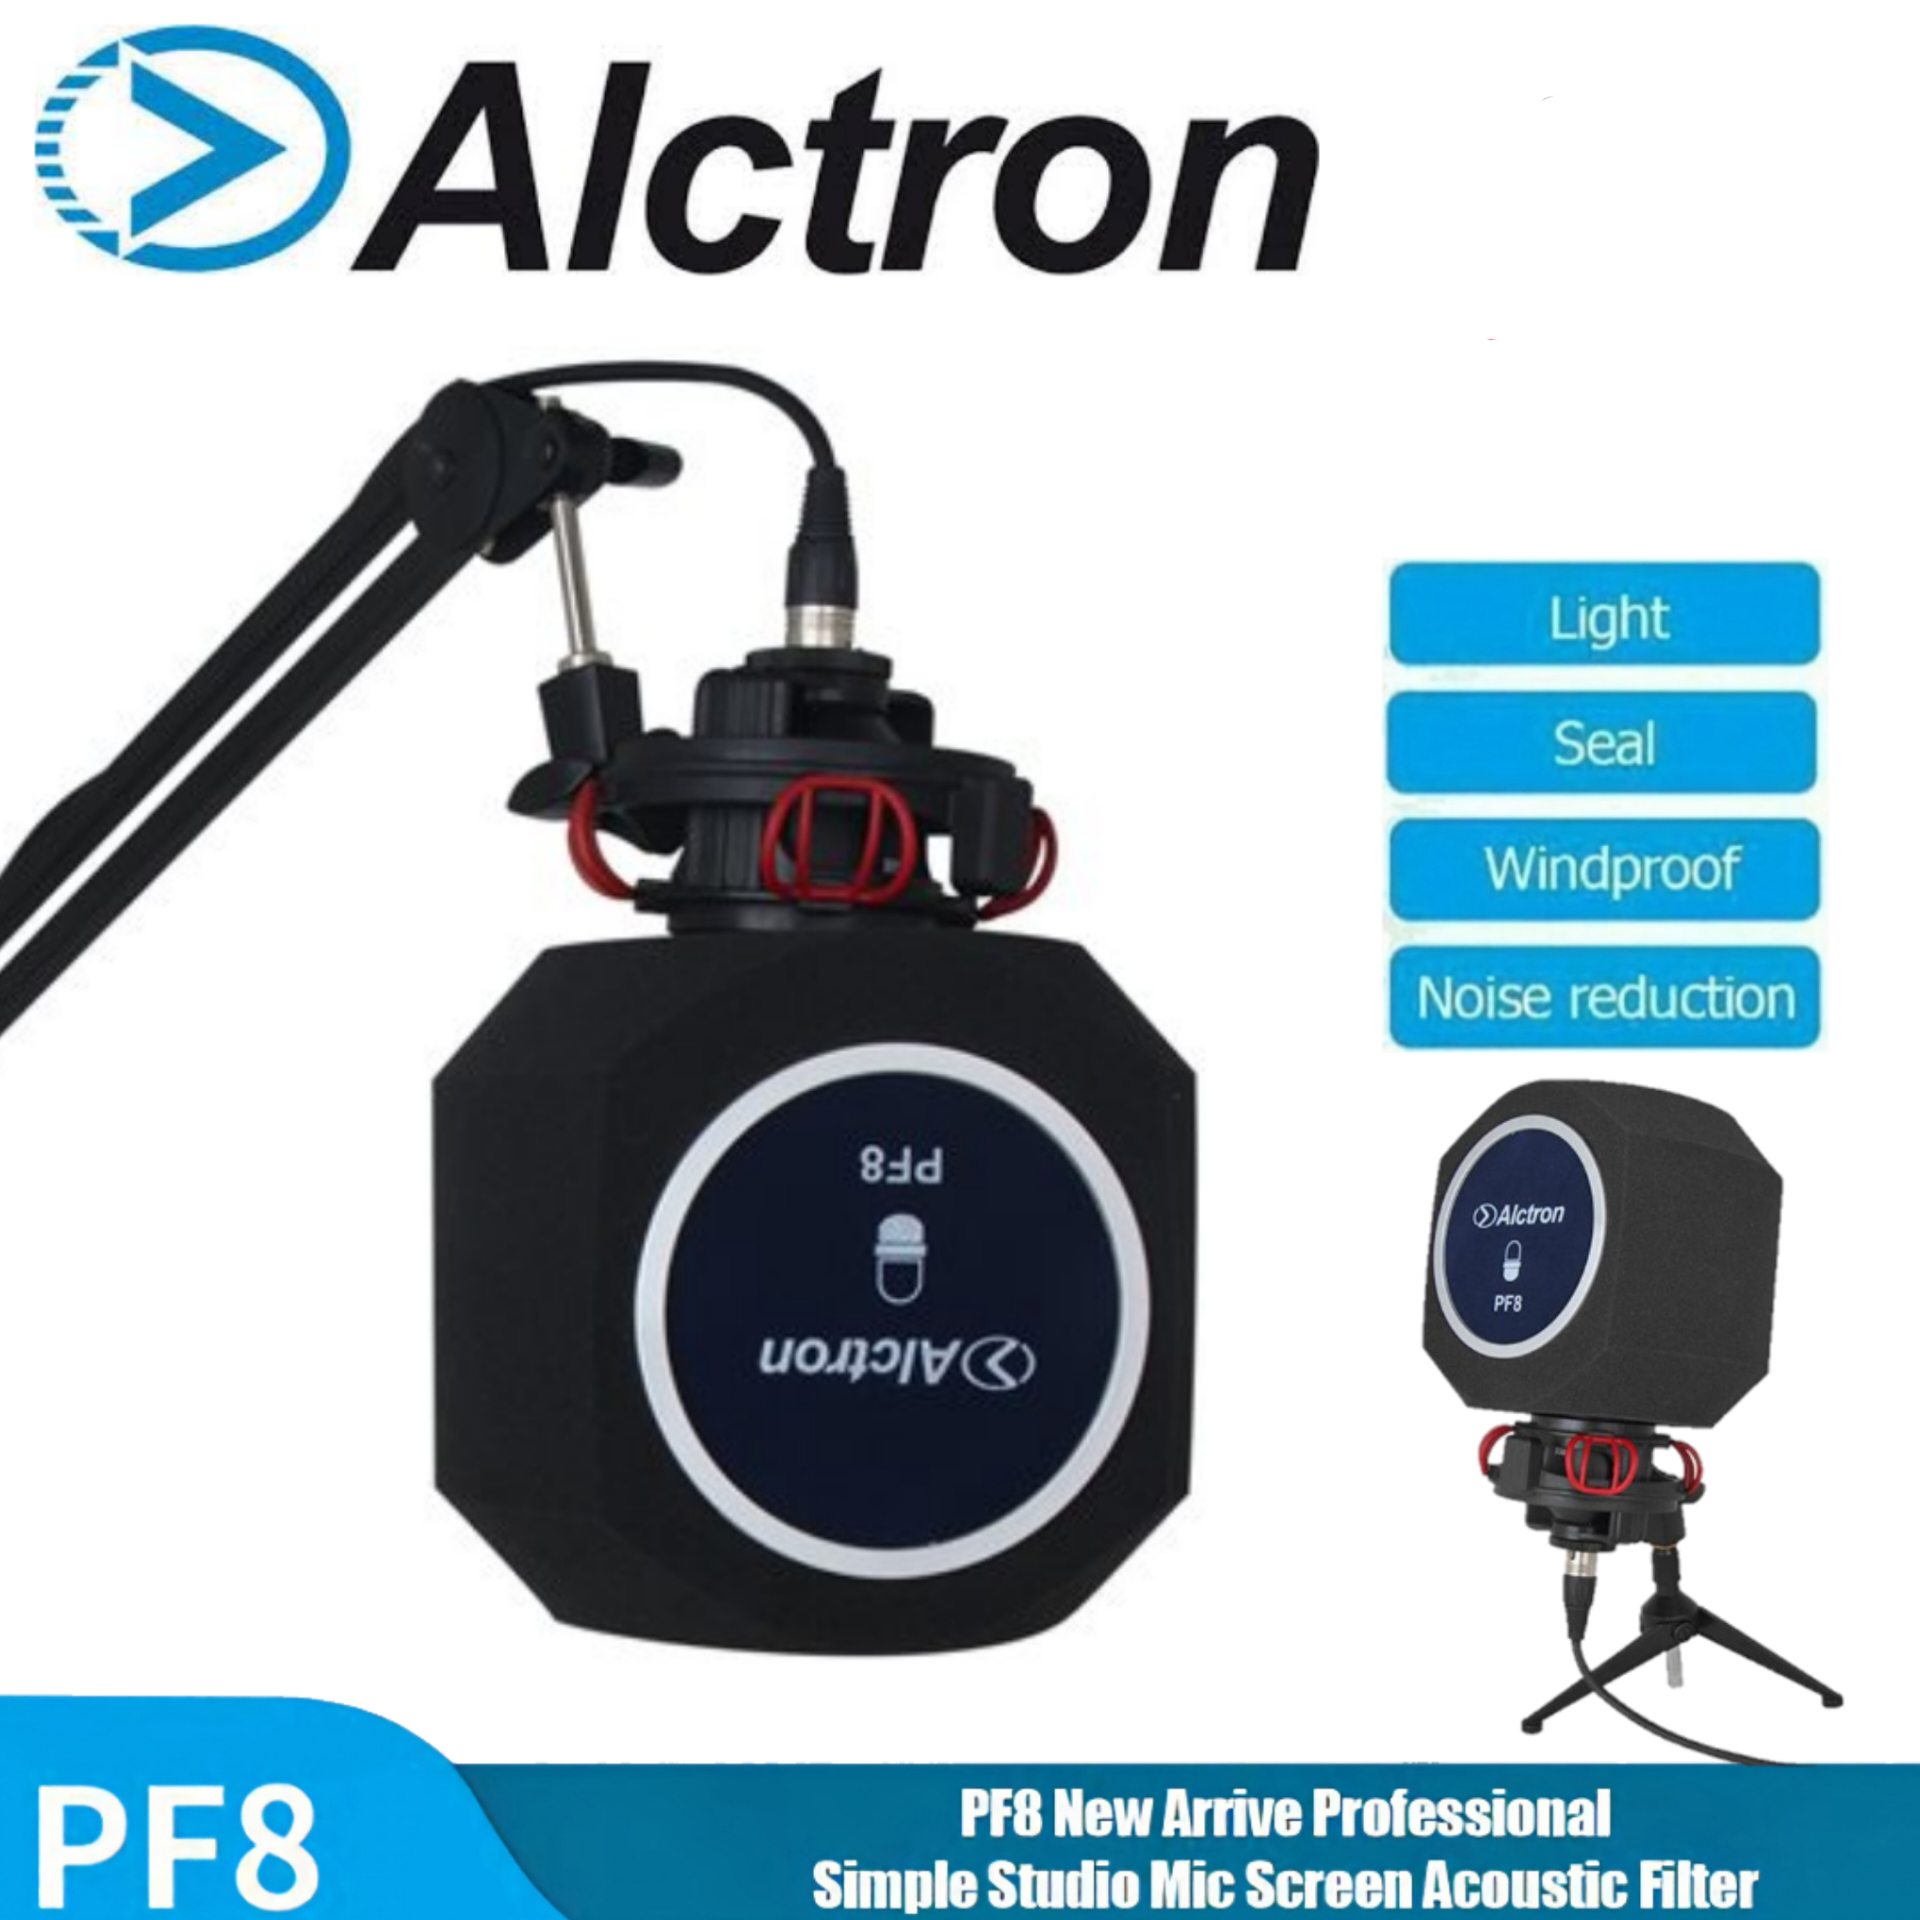 Alctron PF8 Studio Mic Screen, Acoustic Filter, Cover, Pop Filter Foam Wind Shield Noise Reduction